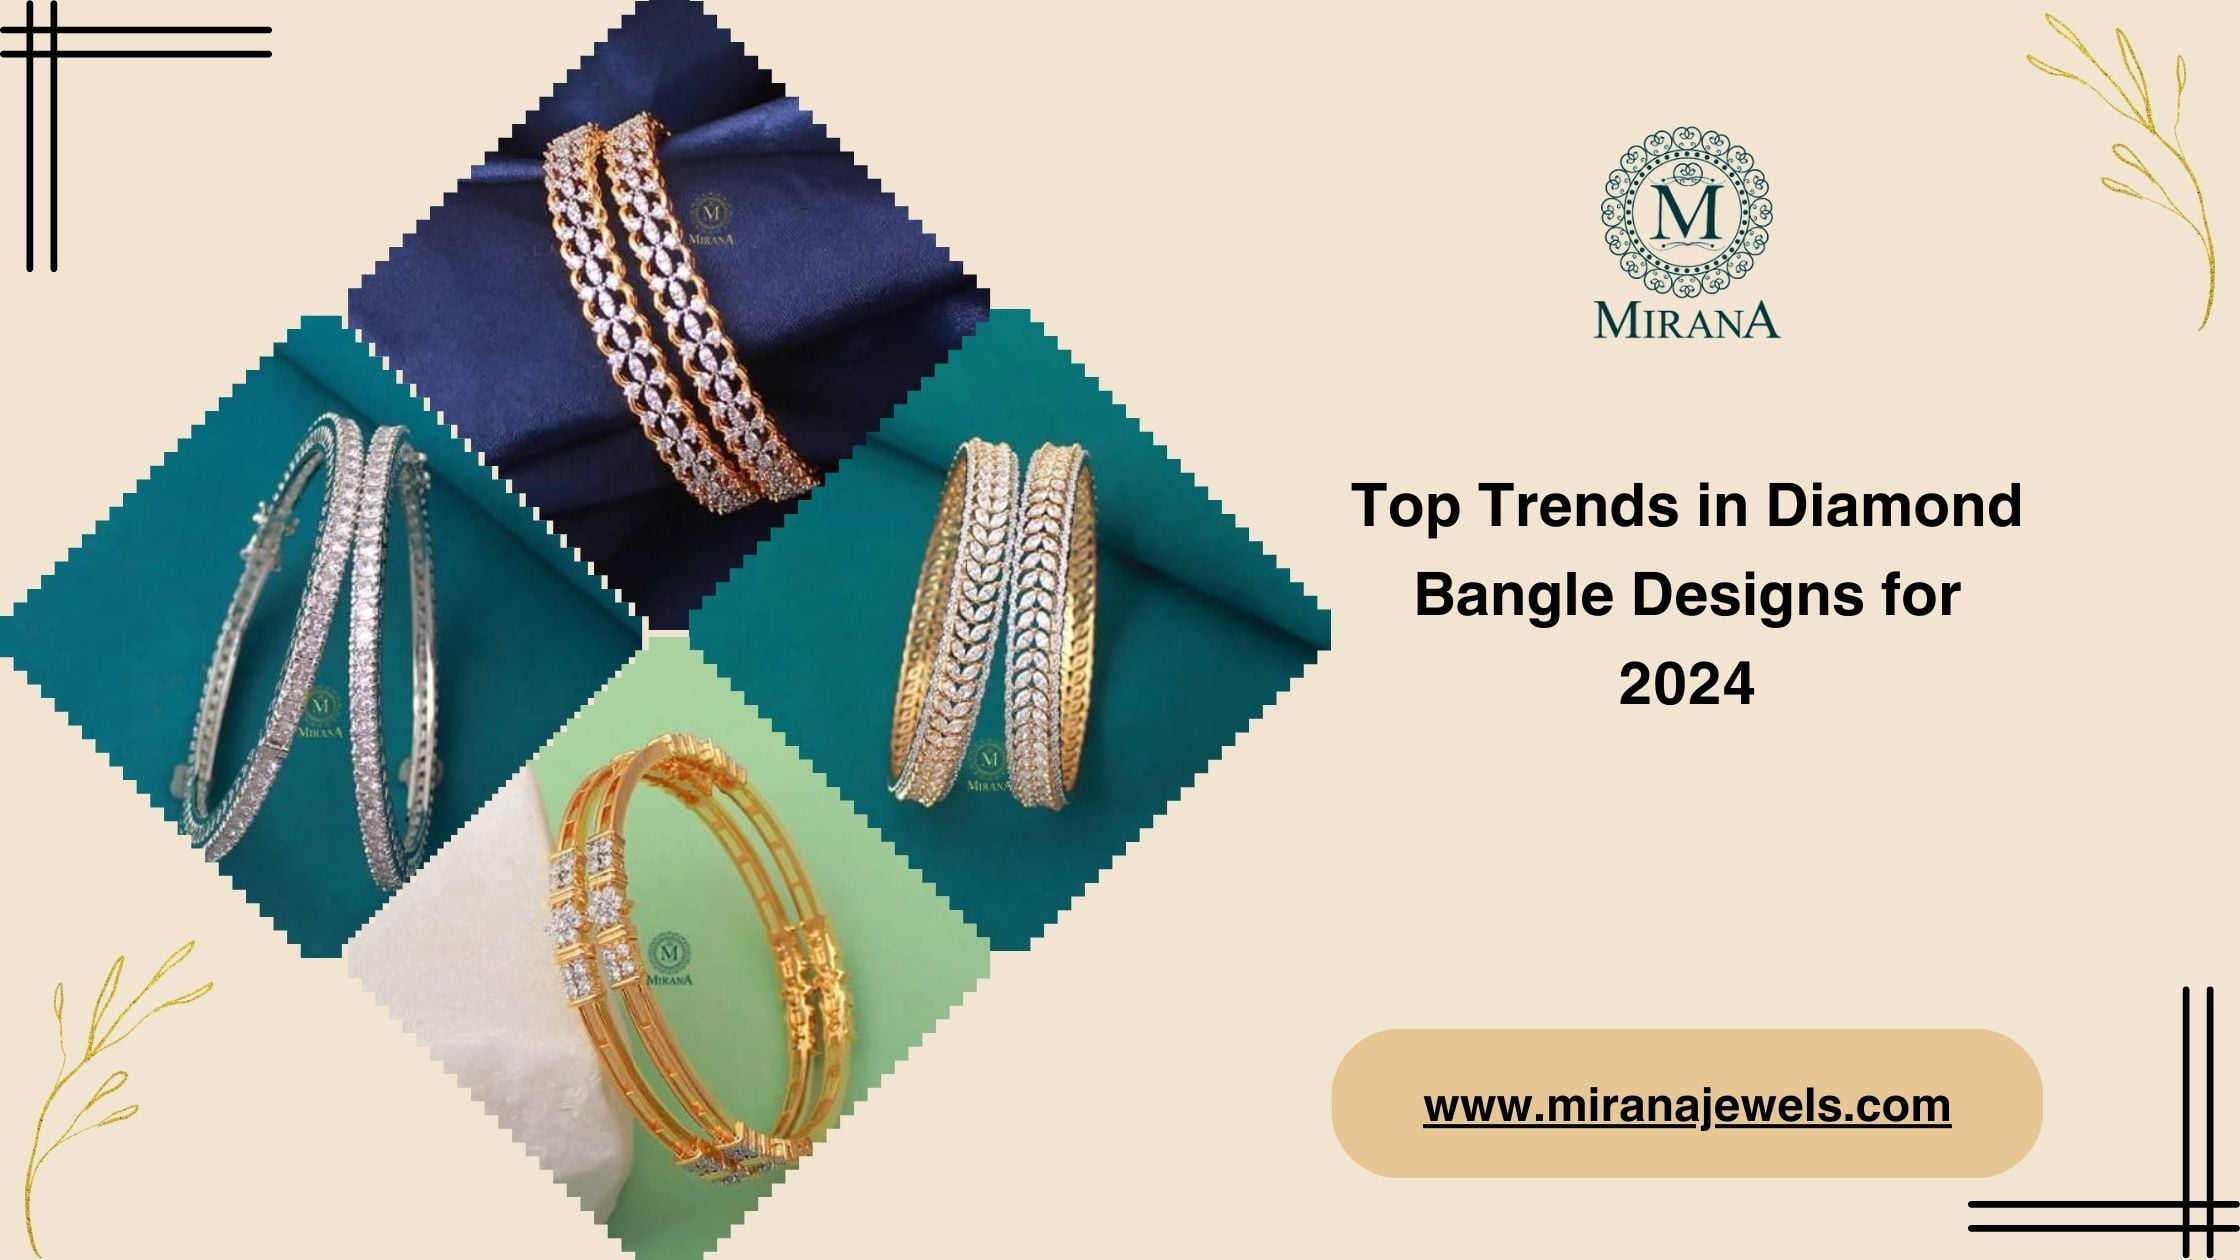 Top Trends in Diamond Bangle Designs for 2024